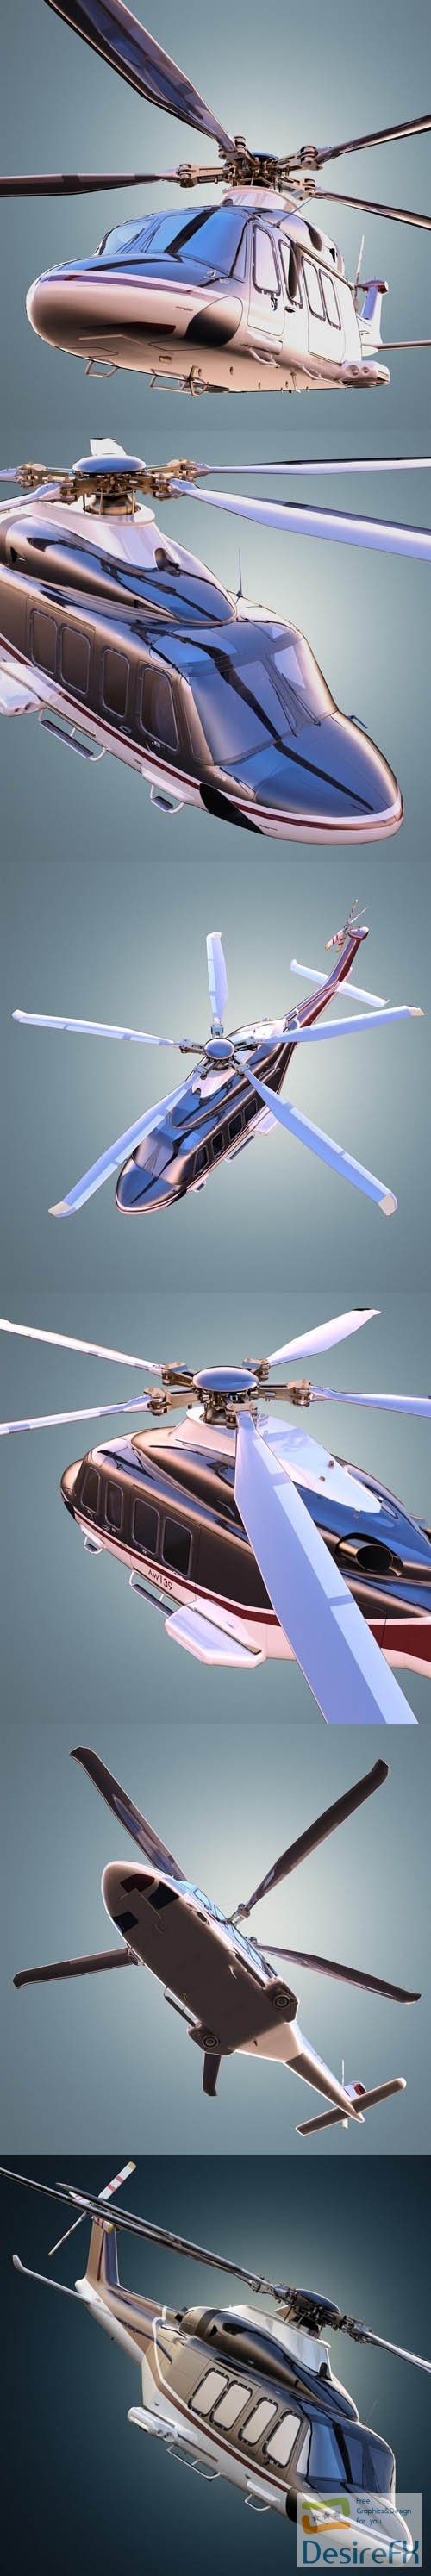 Realistic and fully detailed model AgustaWestland AW139 helicopter